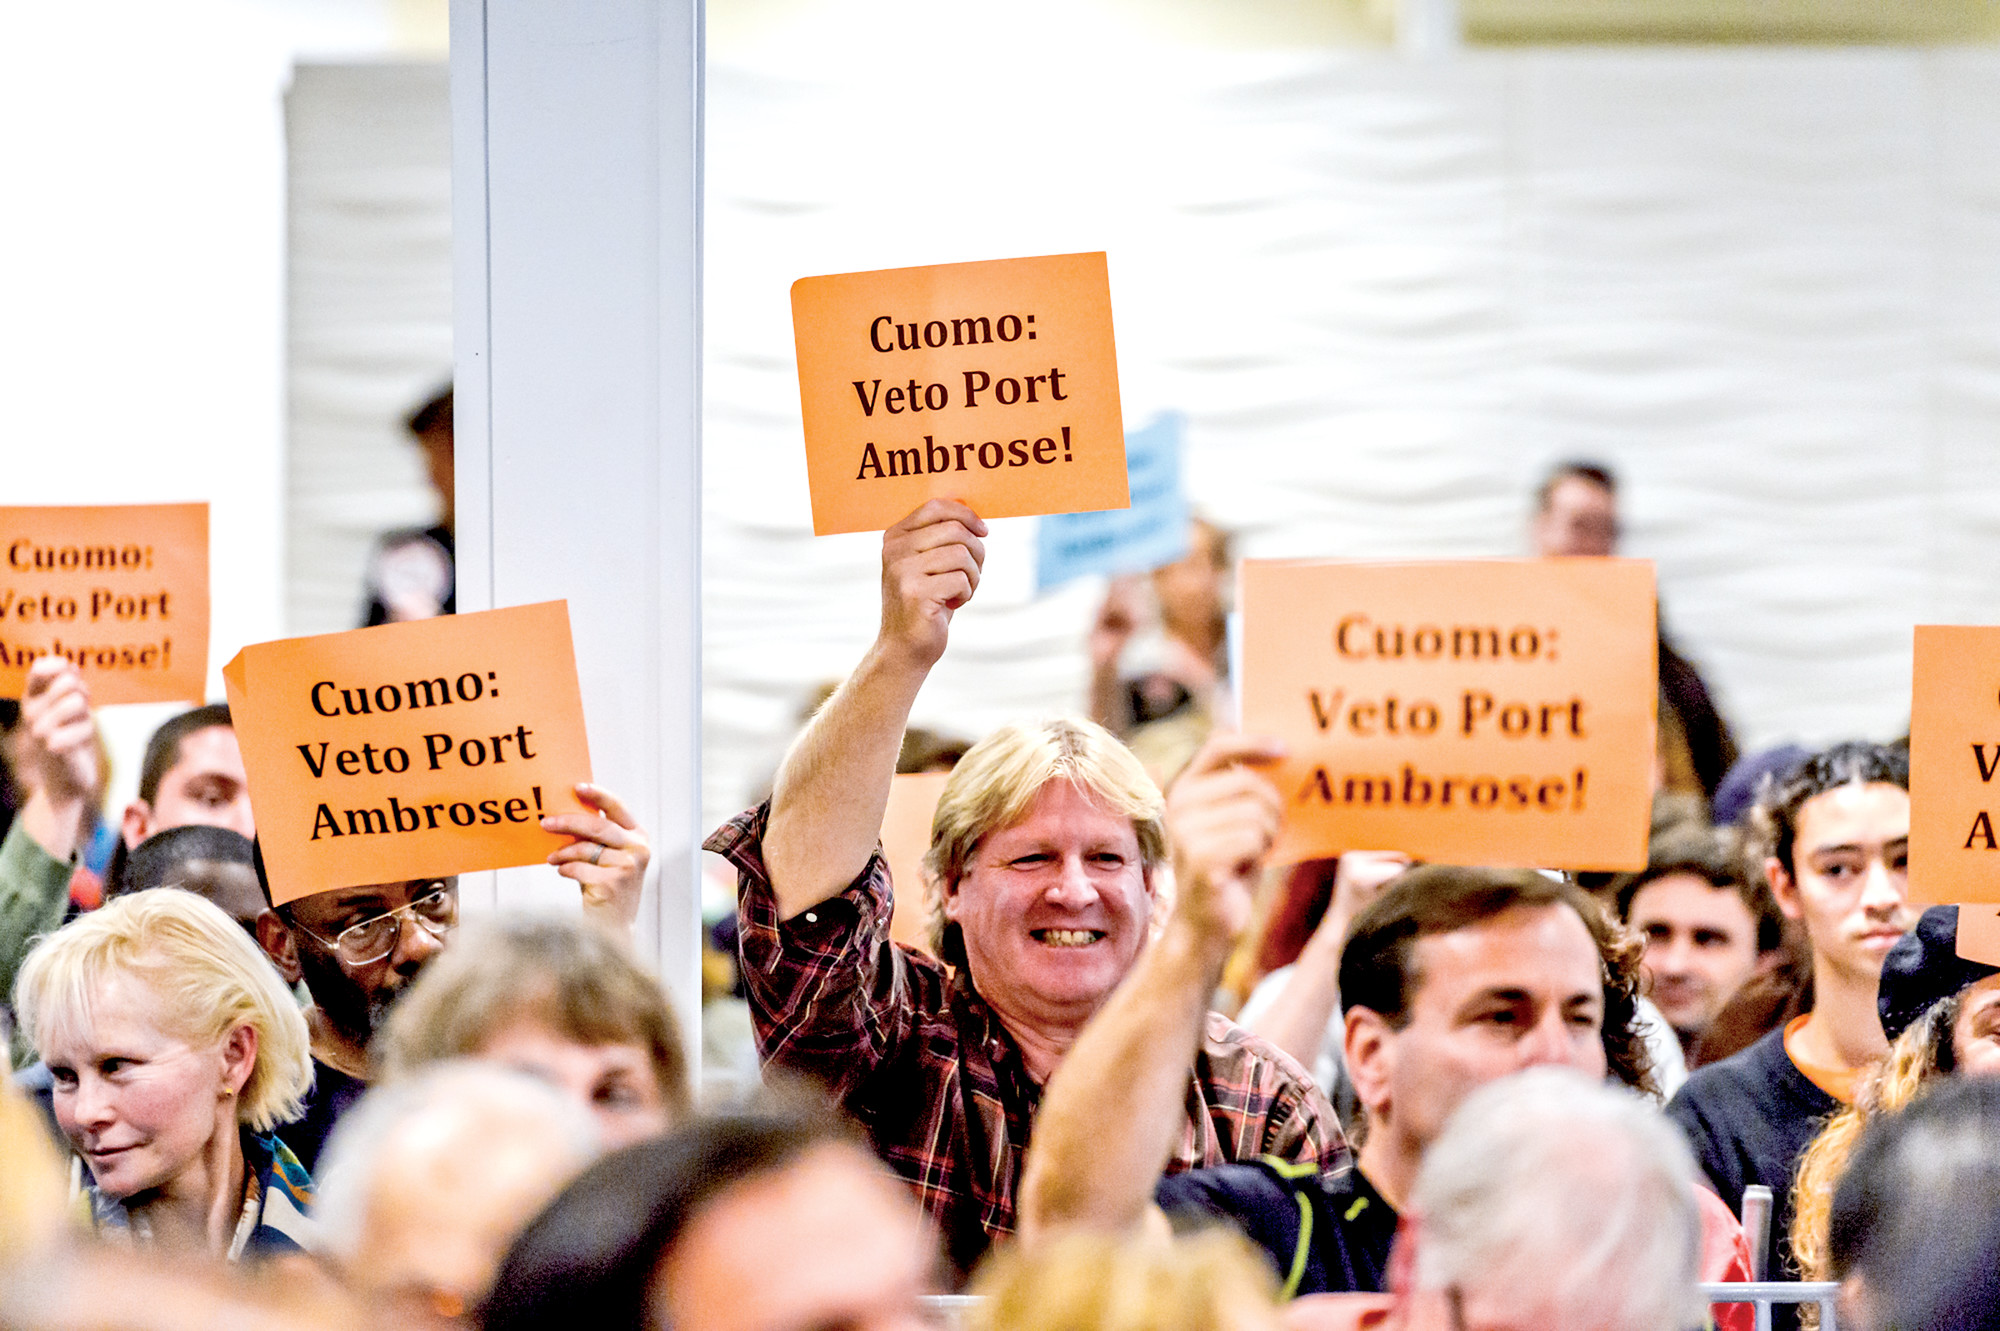 Environmentalist Scott Bochner was among the hundreds who turned out to voice their opposition to Port Ambrose.